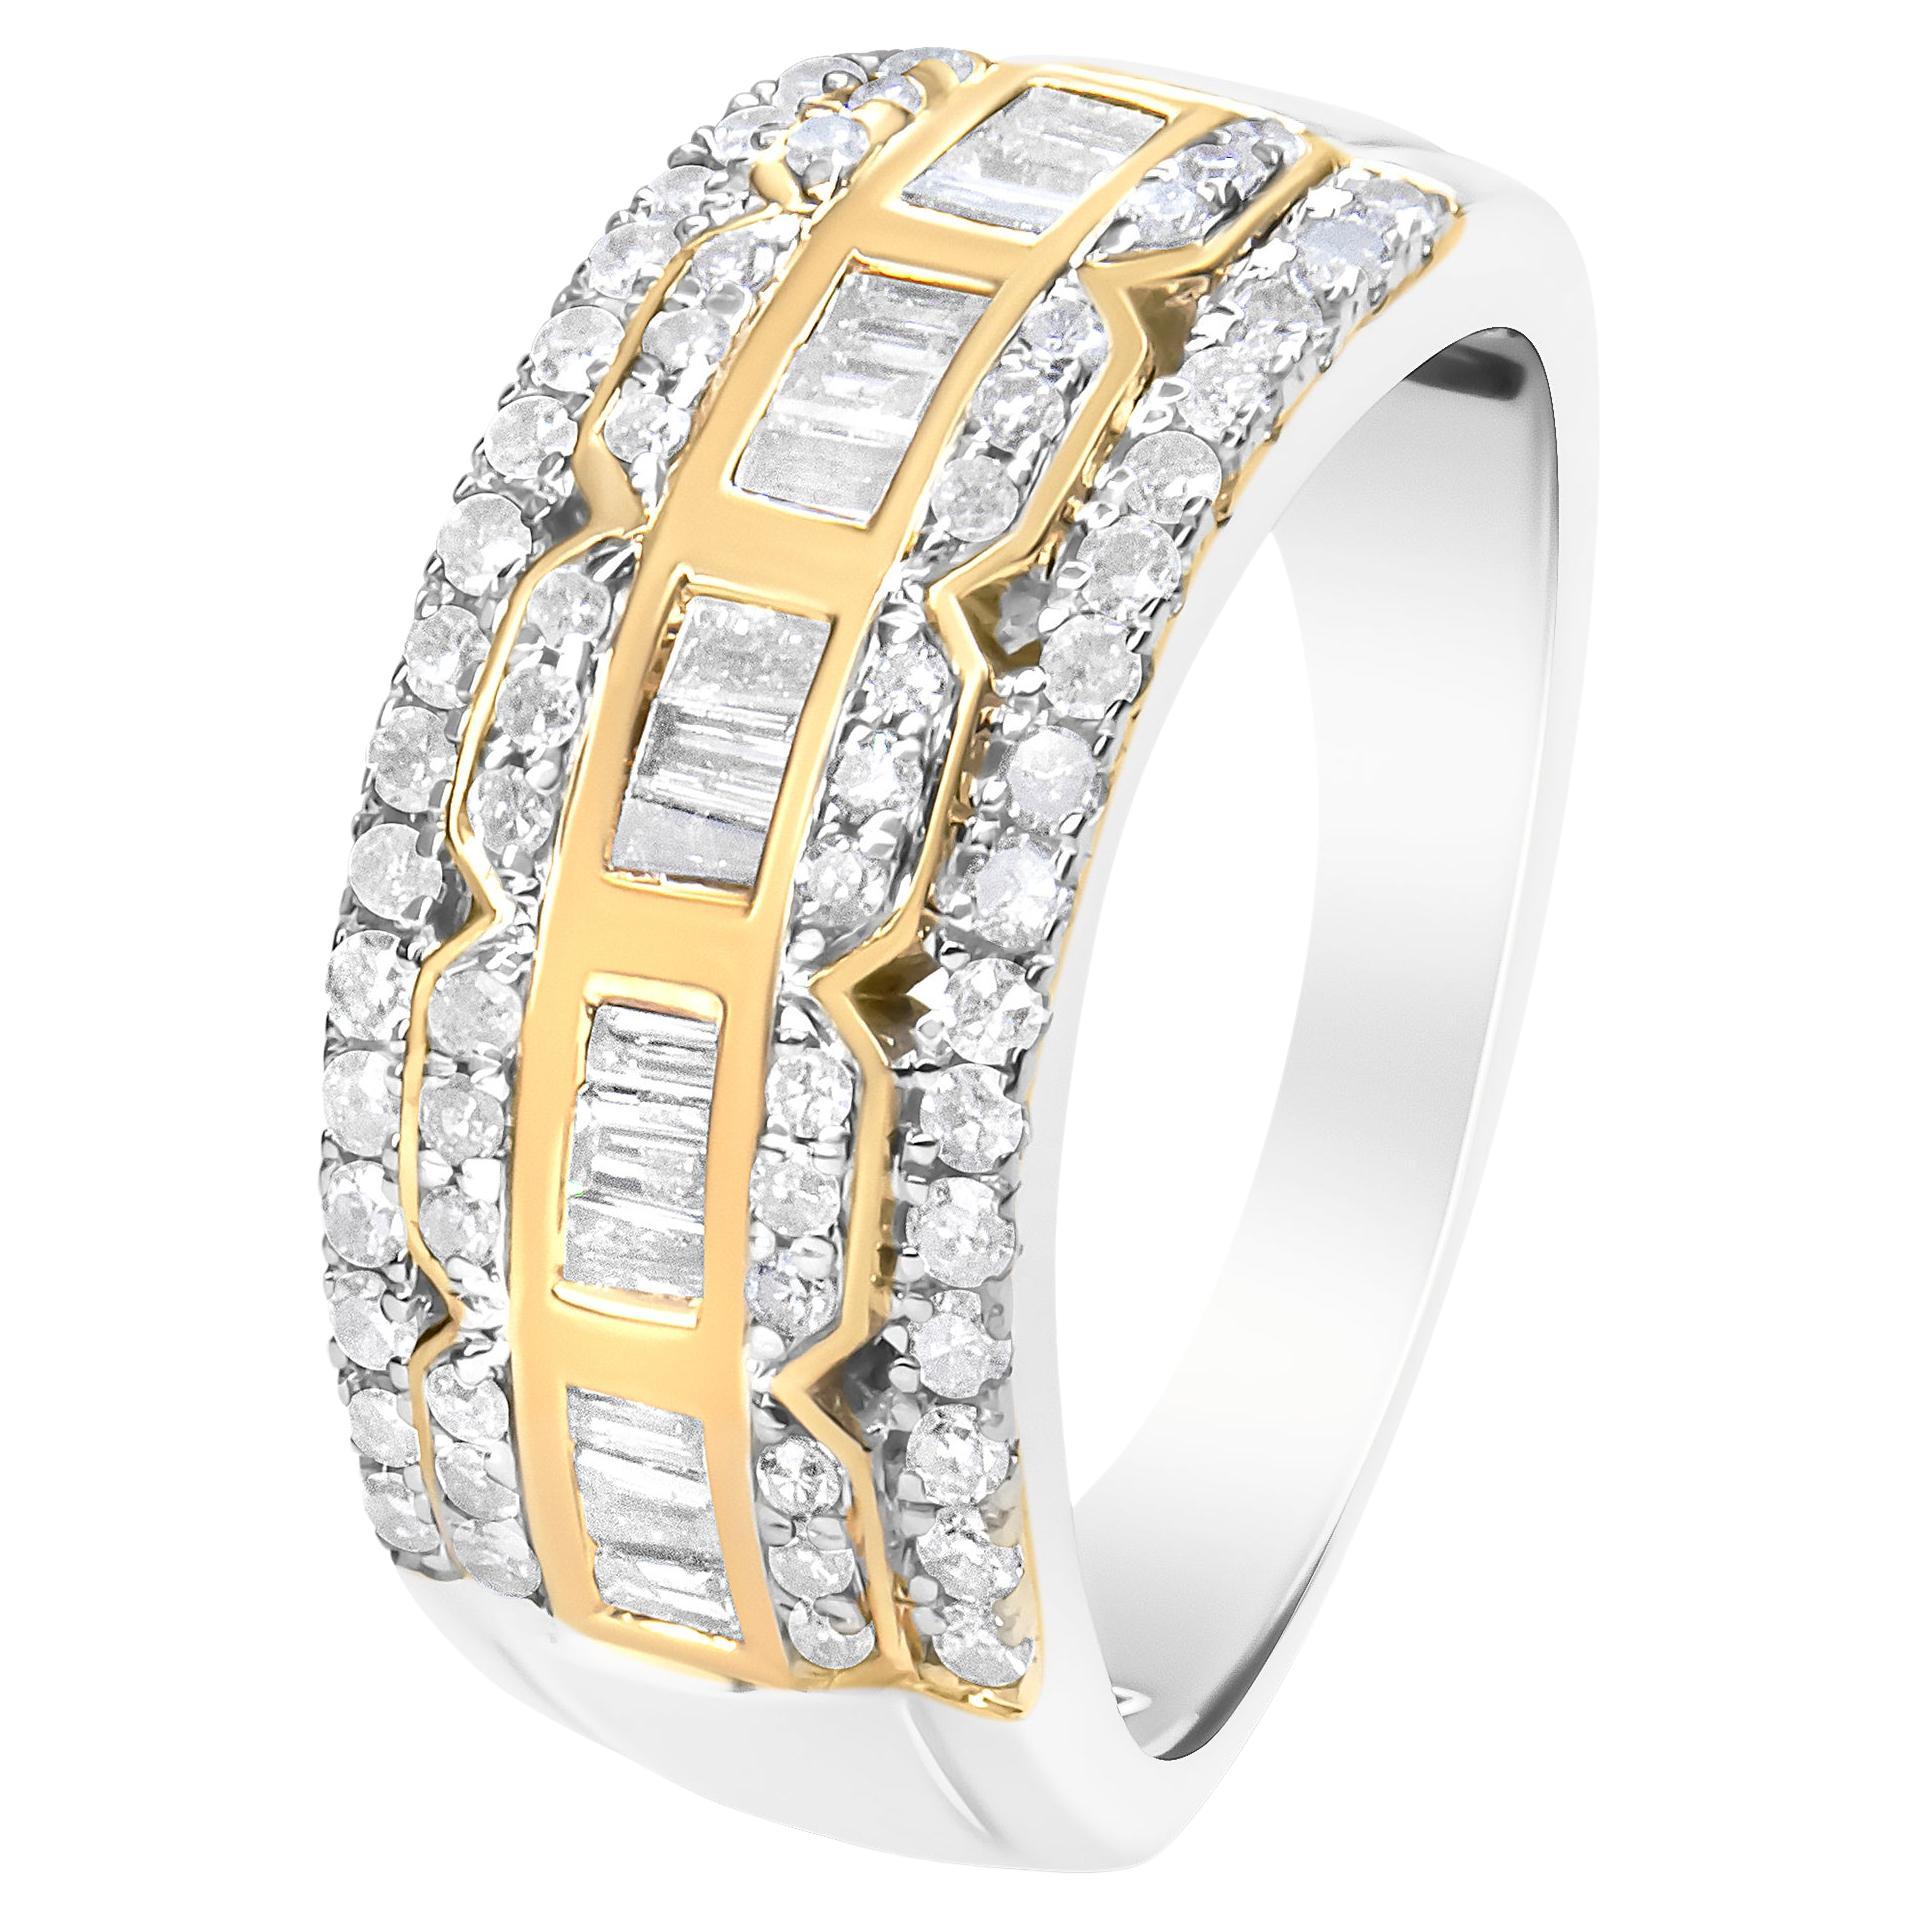 For Sale:  10K White and Yellow Gold 1.0 Carat Diamond Art Deco Multi-Row Ring Band